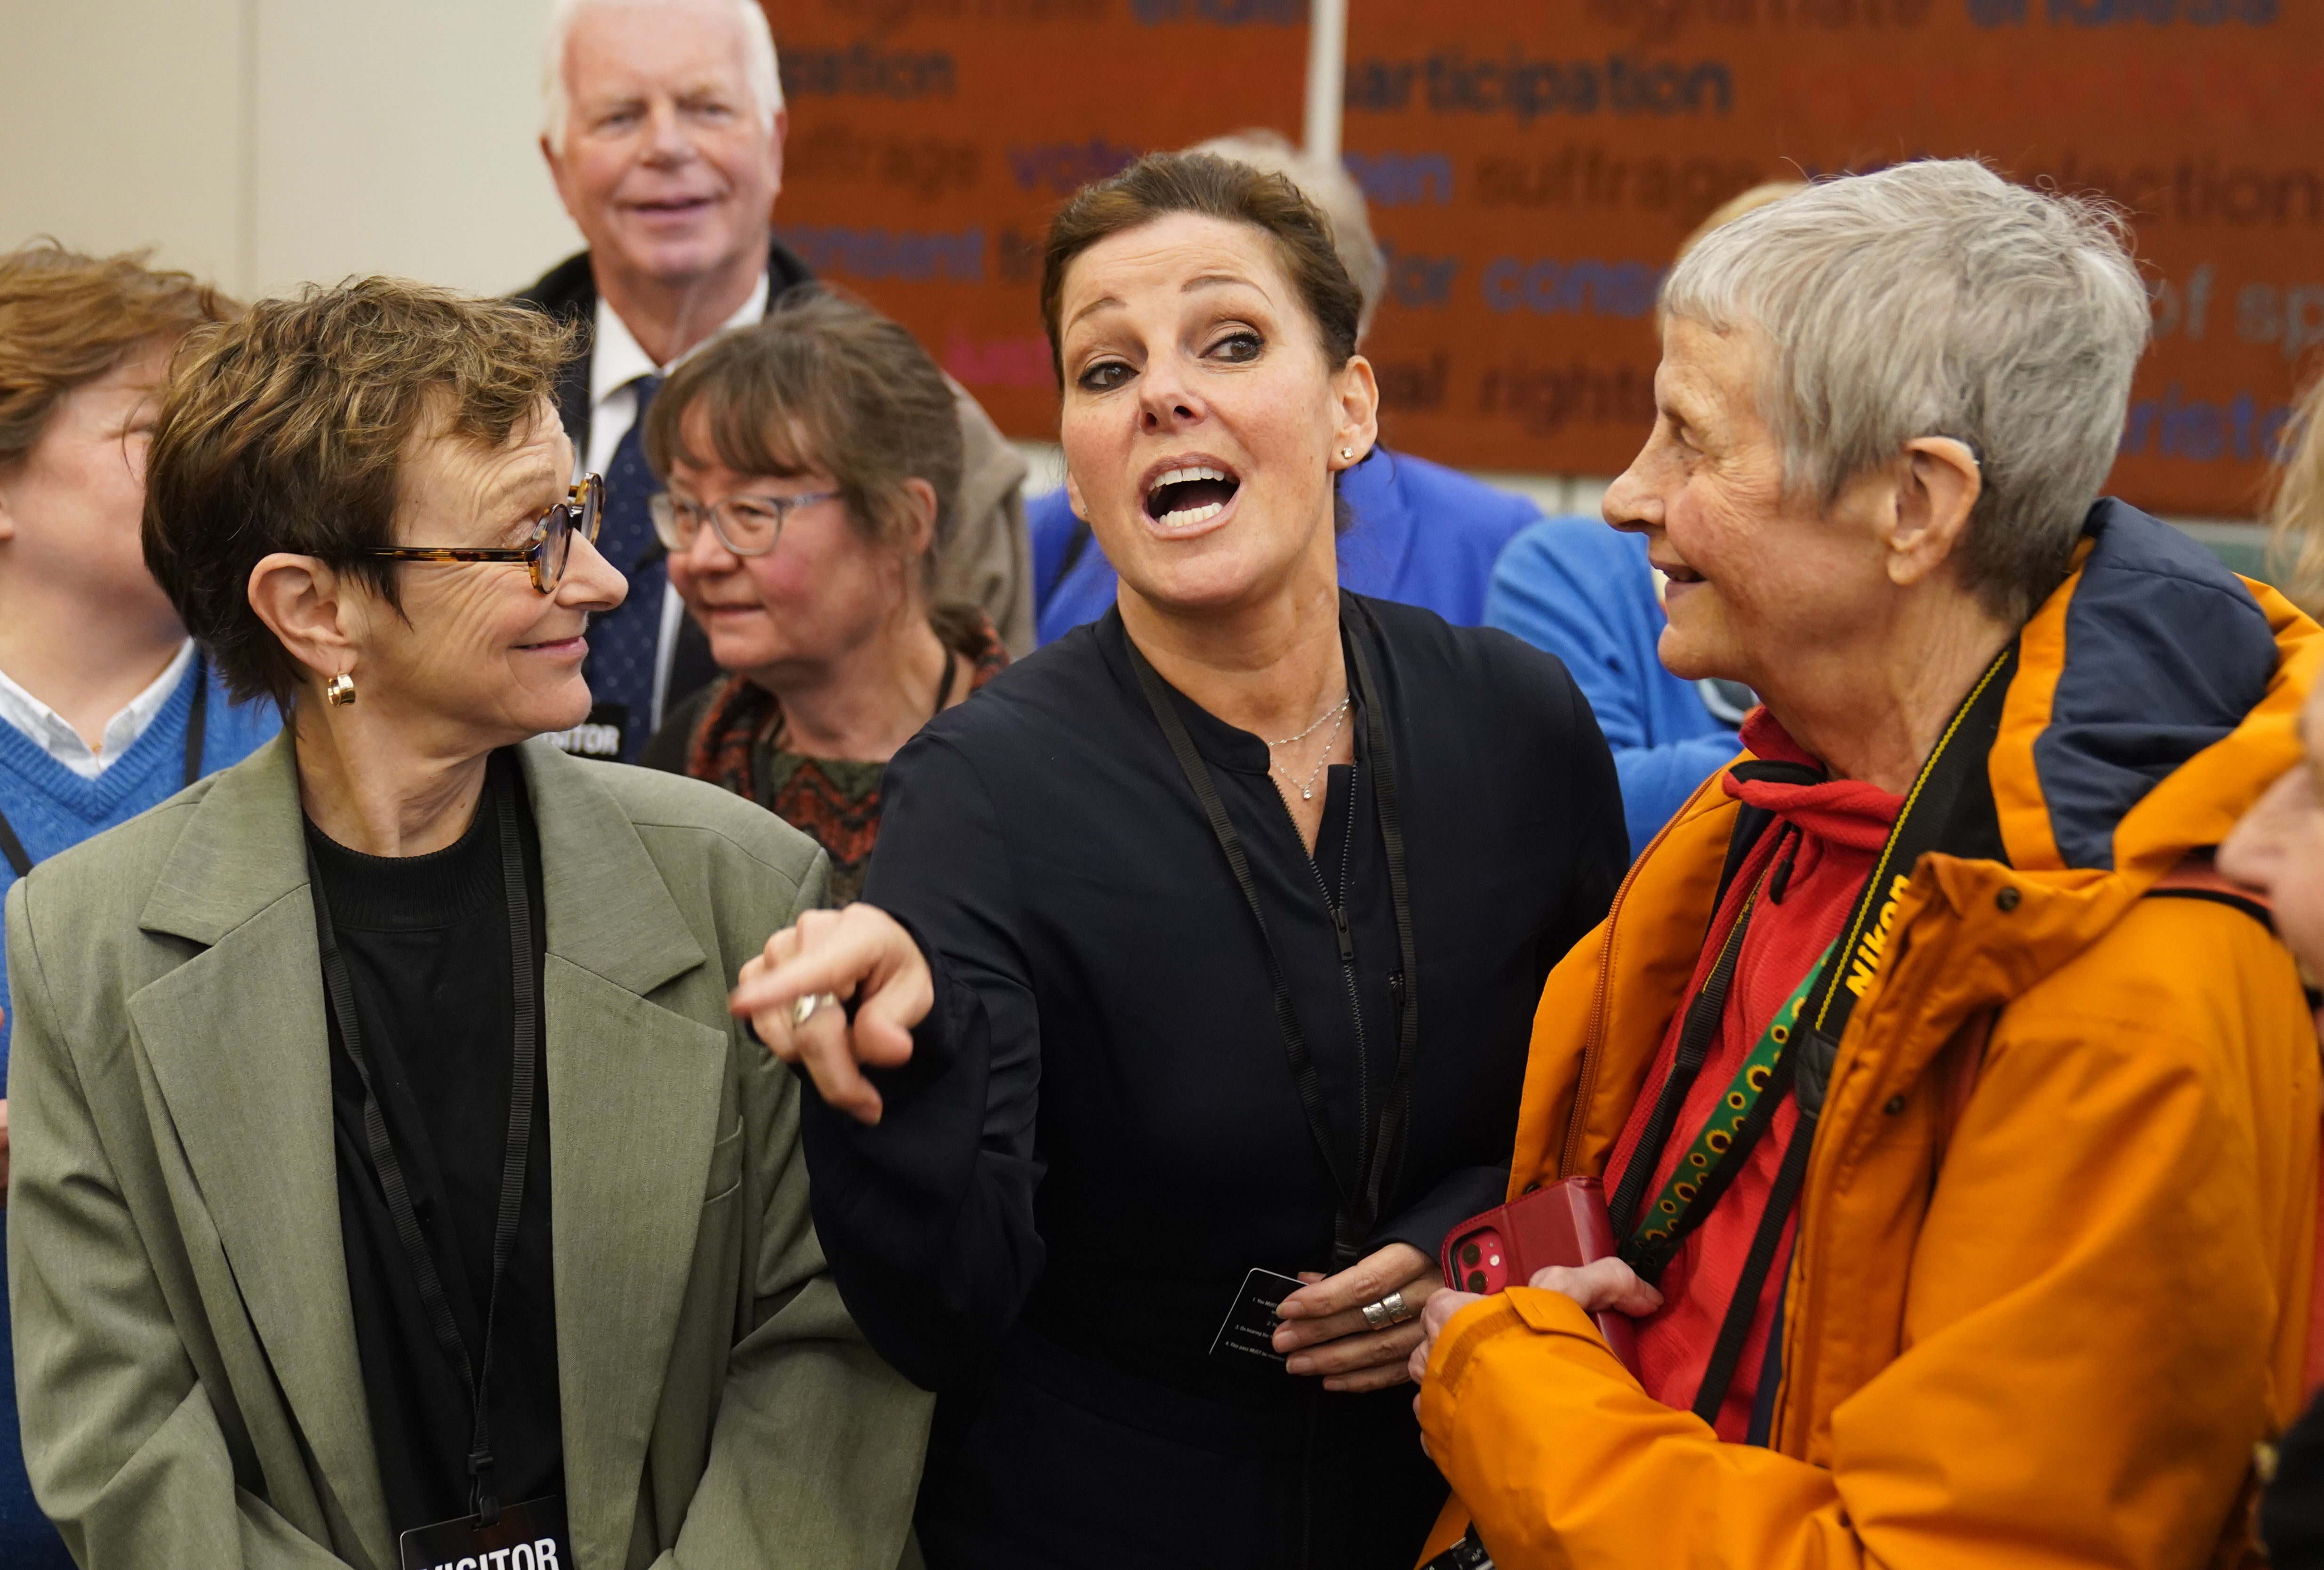 Ruthie Henshall (centre) speaks to the media after the meeting (Stefan Rousseau/PA)